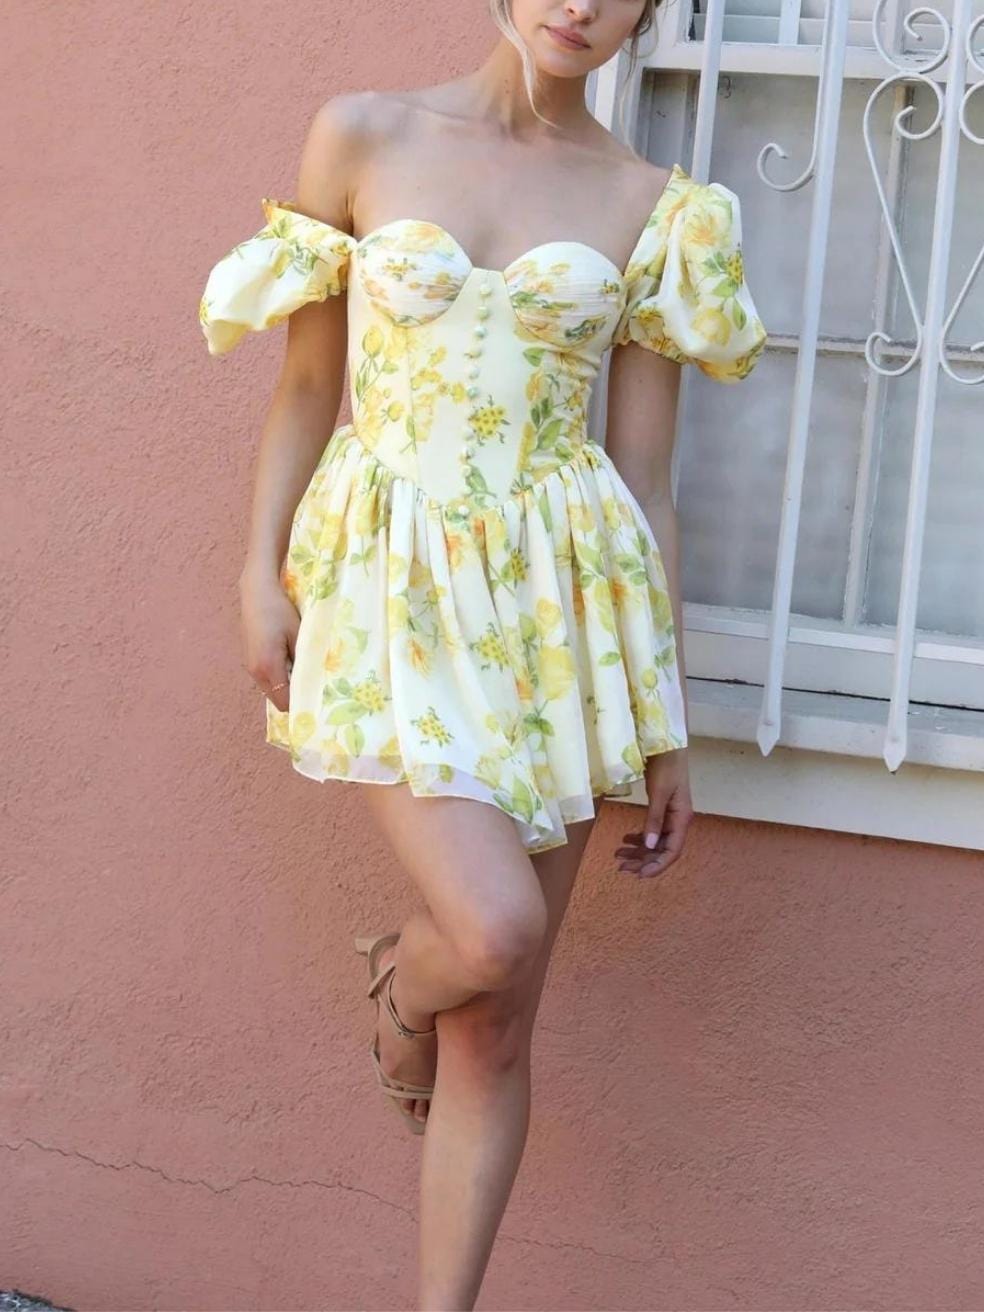 HERE COMES THE SUN Dress in Bright Yellow